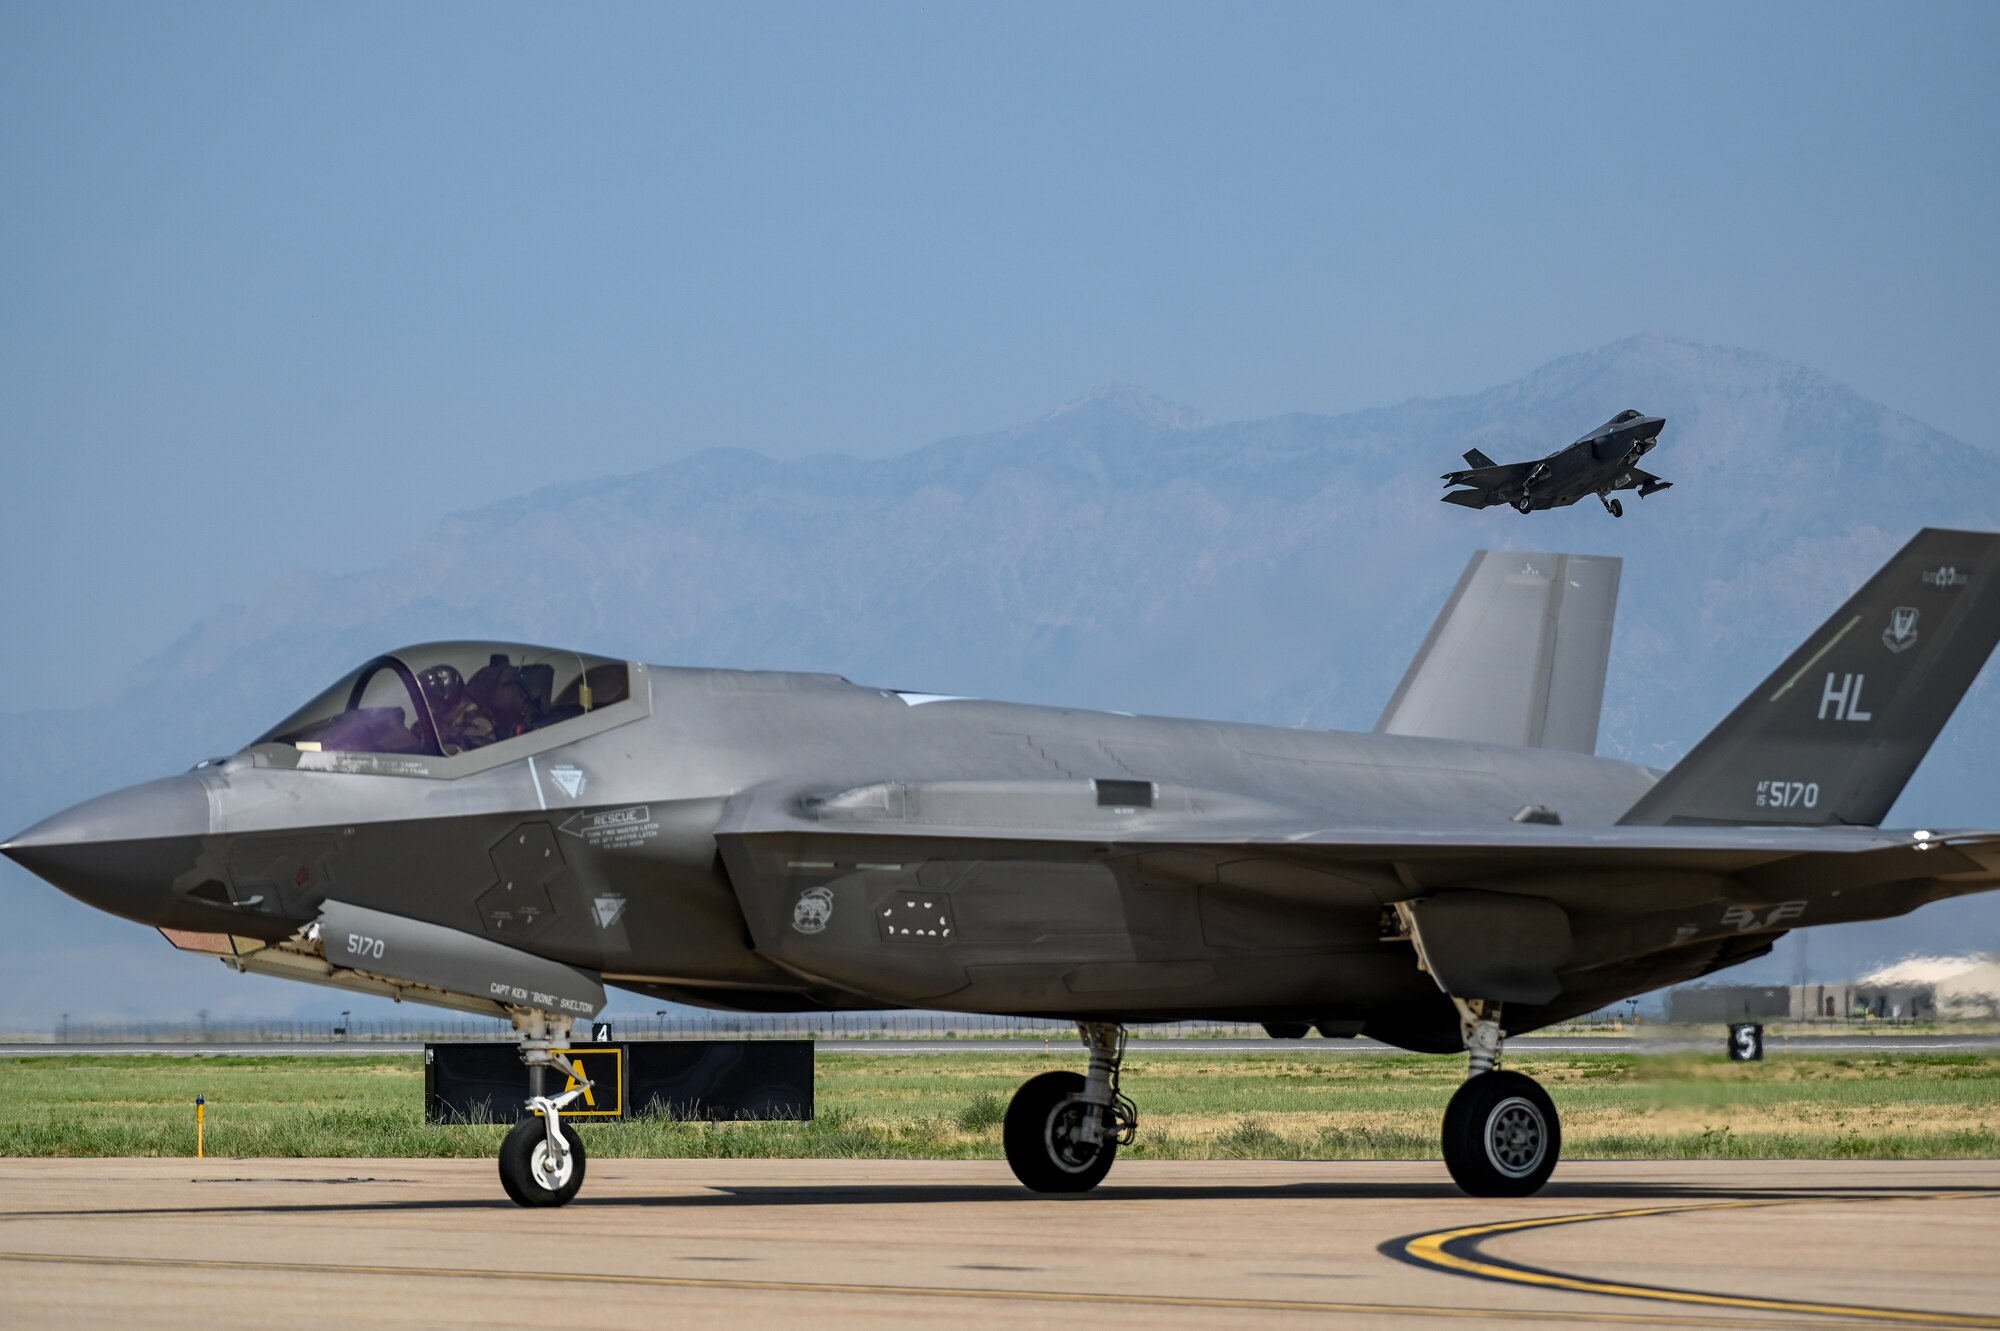 An F-35A Lightning II assigned to 388th Fighter Wing at Hill lands as another F-35A from the 63rd Fighter Squadron at Luke Air Force Base takes off Aug. 25, 2021, at Hill Air Force Base, Utah. The 63rd FS was participating in a Weapons System Evaluation Programs, known as Combat Hammer and Combat Archer, which tests and validates the performance of crews, pilots, and their technology while deploying air-to-air and air-to-ground munitions. (U.S. Air Force photo by Cynthia Griggs)